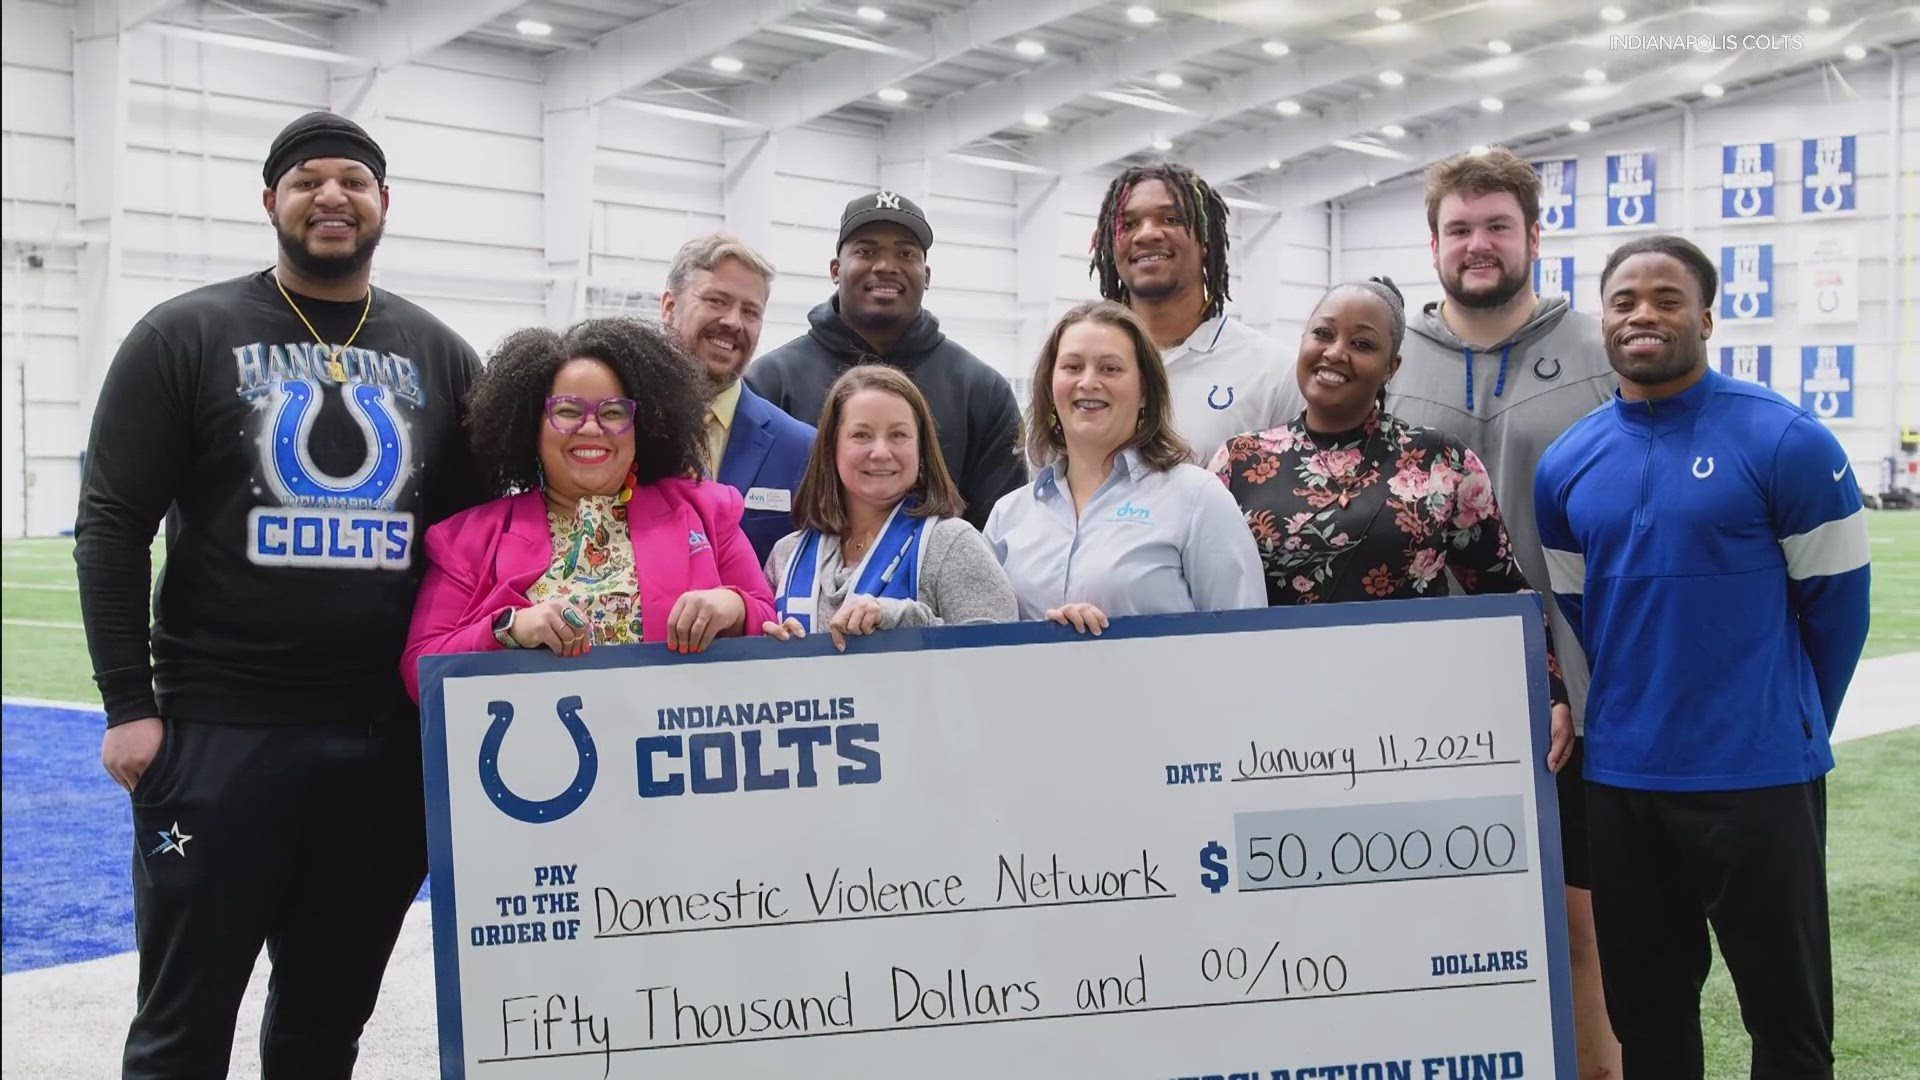 The $50,000 donated to the Domestic Violence Network in Indianapolis is through the Players Action Fund.